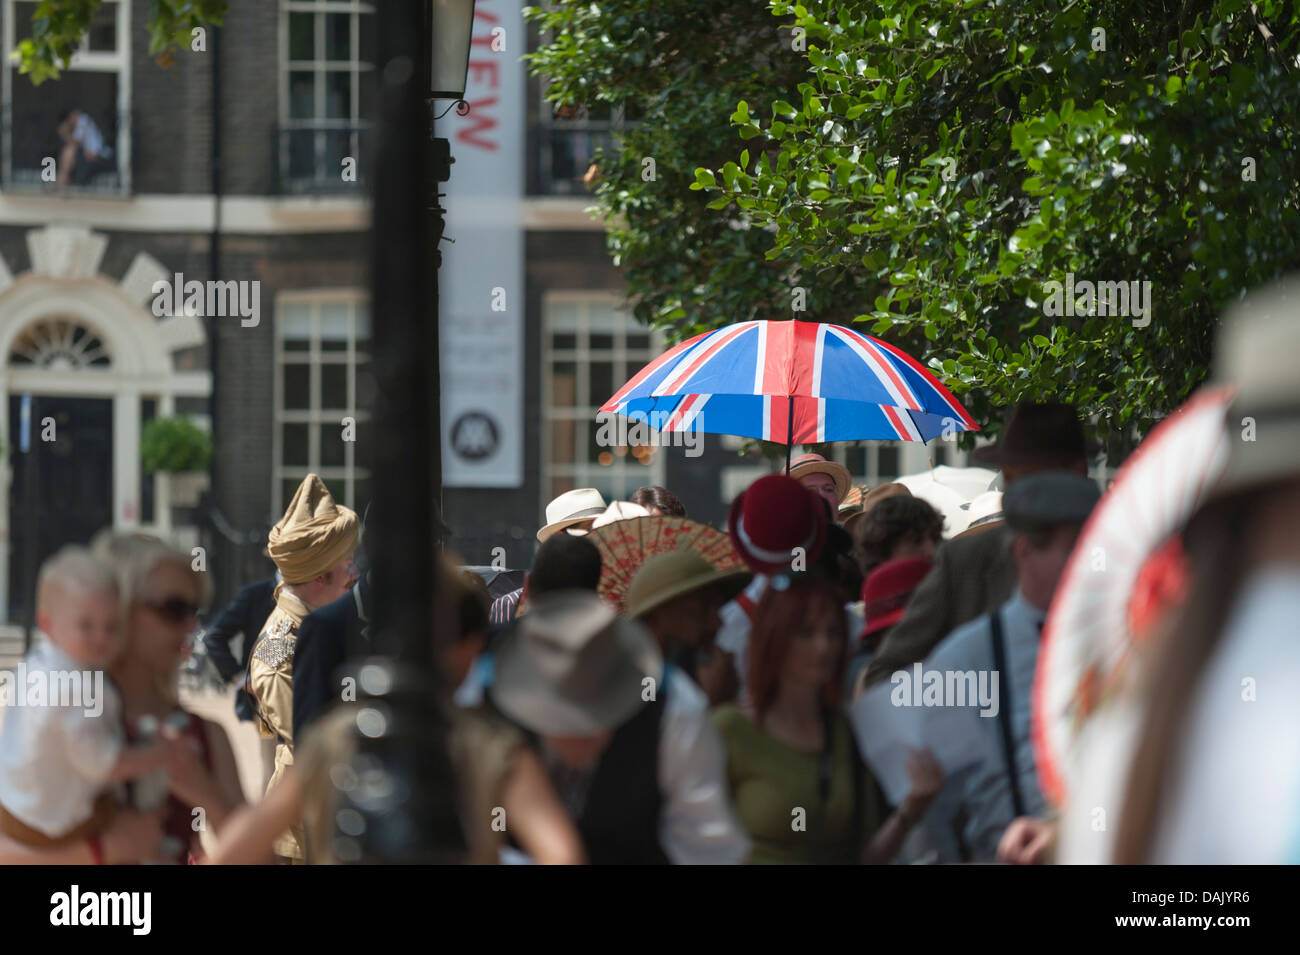 A Union Flag umbrella held in the queue of people waiting to enter Bedford Square Gardens for the start of the Chaps Olympiad. Stock Photo